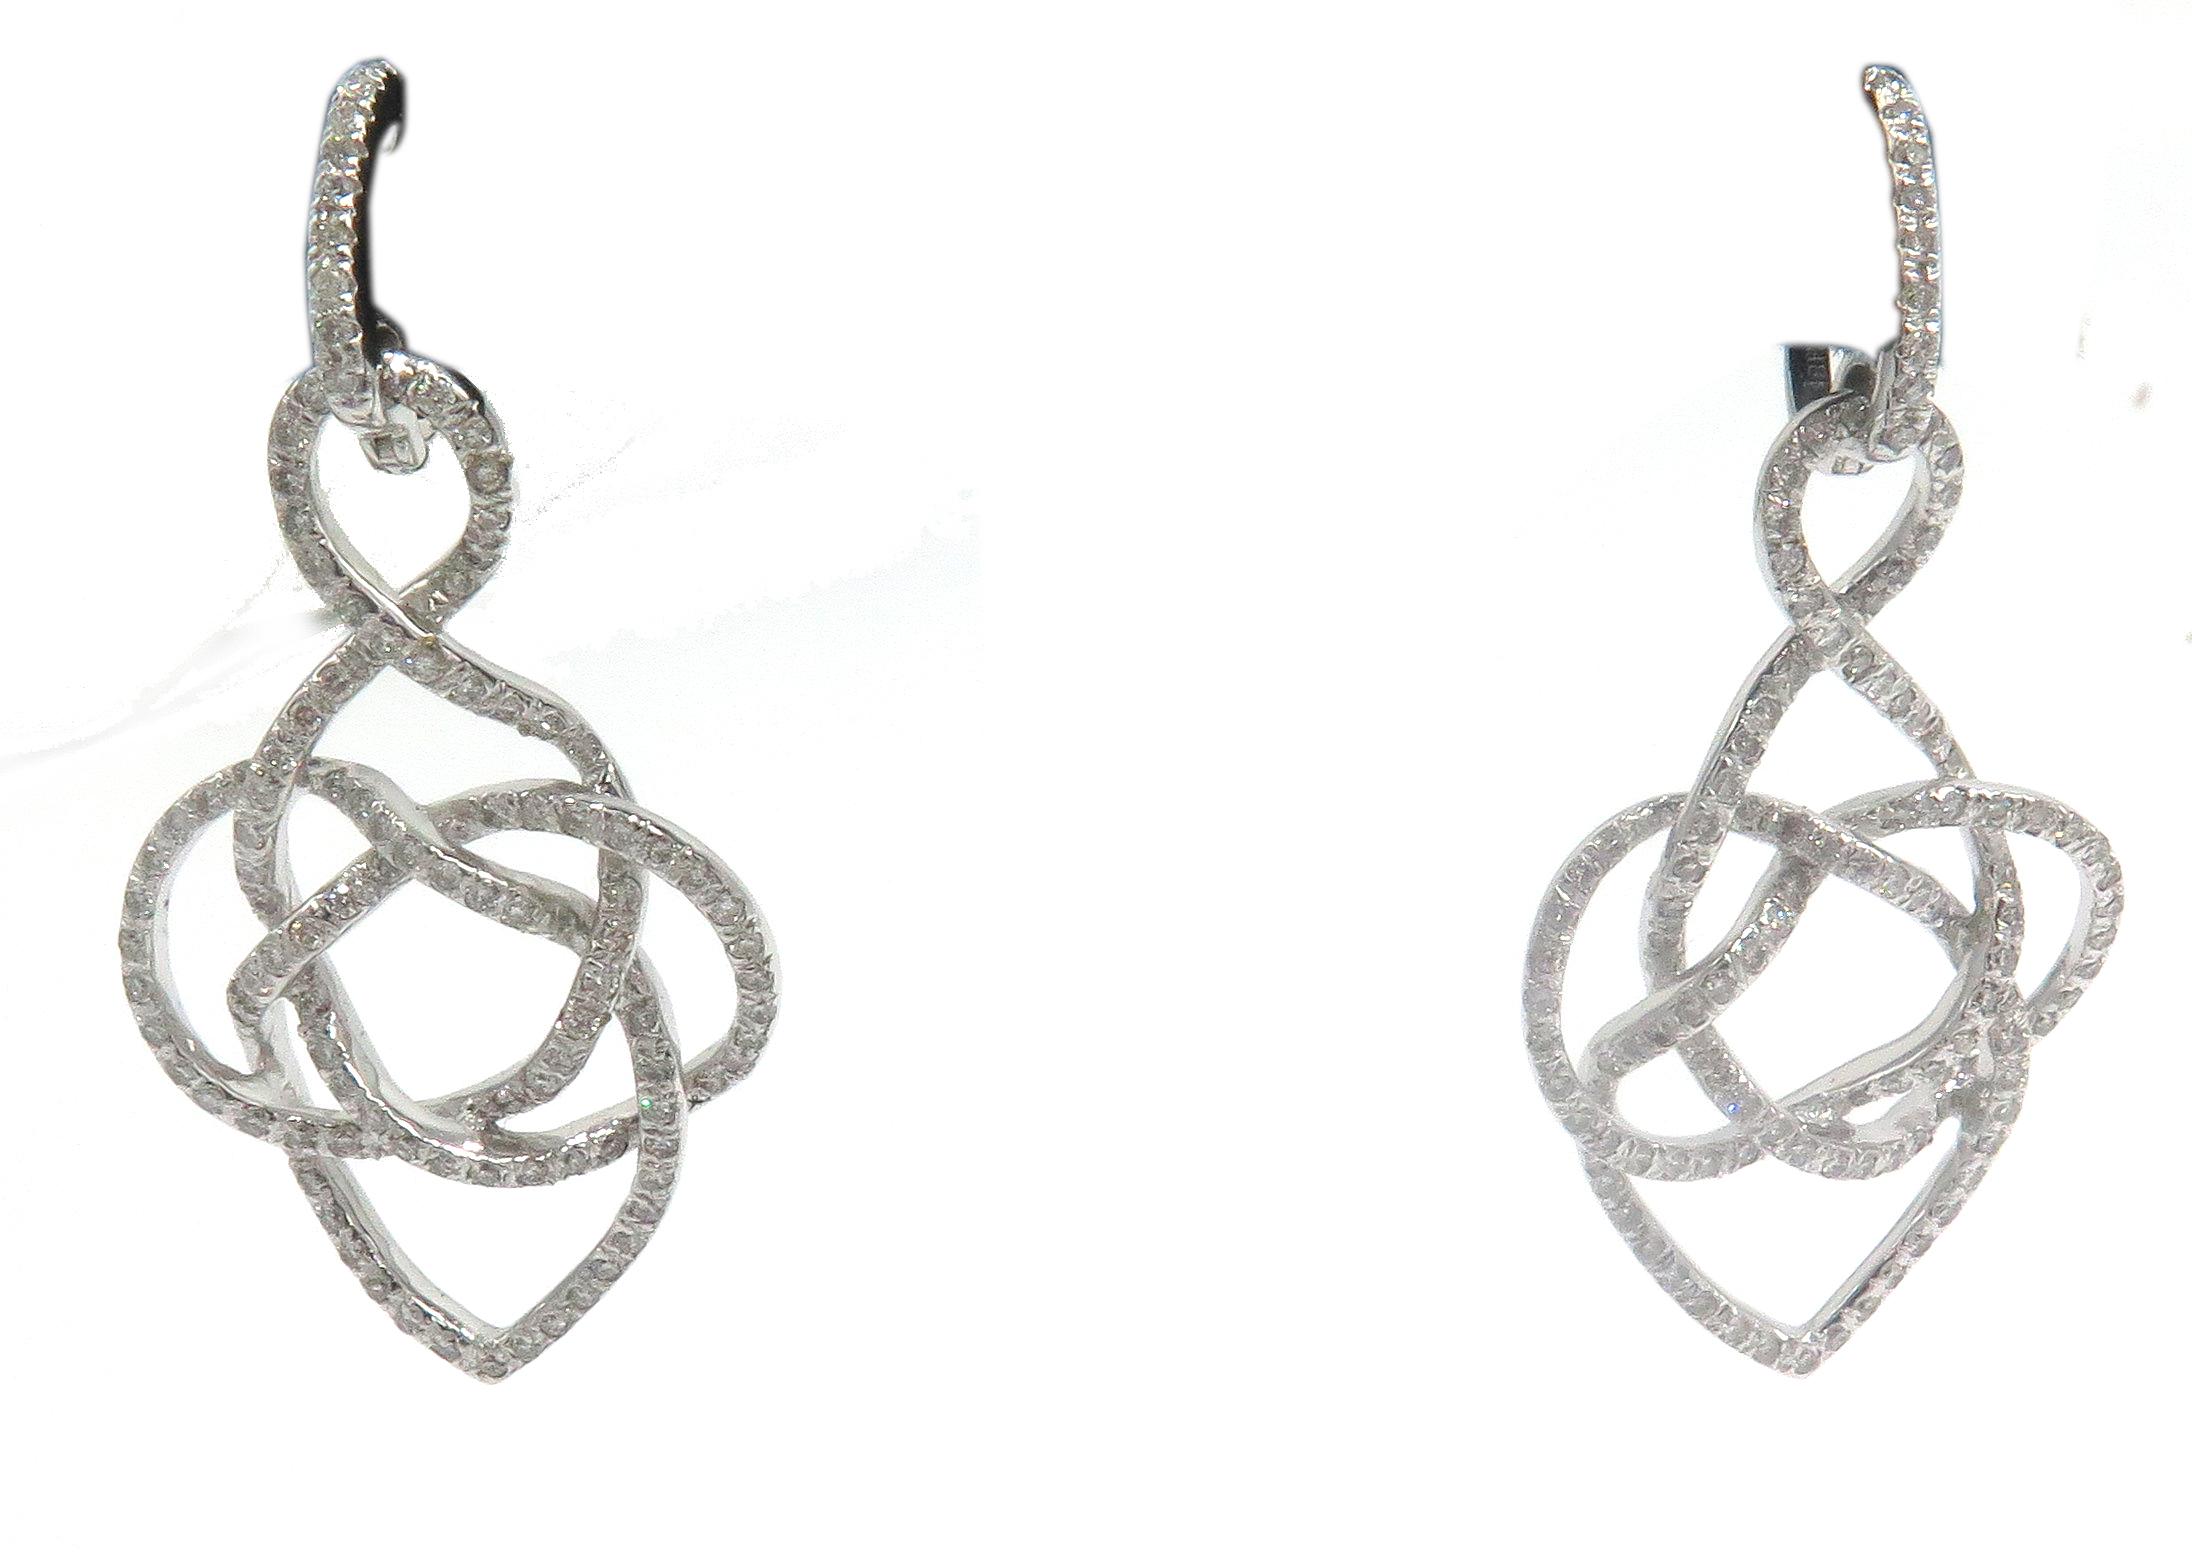 Beatiful, 18k white gold earring earrings. This beautiful pair of earrings feature a lever back and is showered with beautiful round diamonds going through the design of the these beautiful earrings. These, lovely earring also have a matching